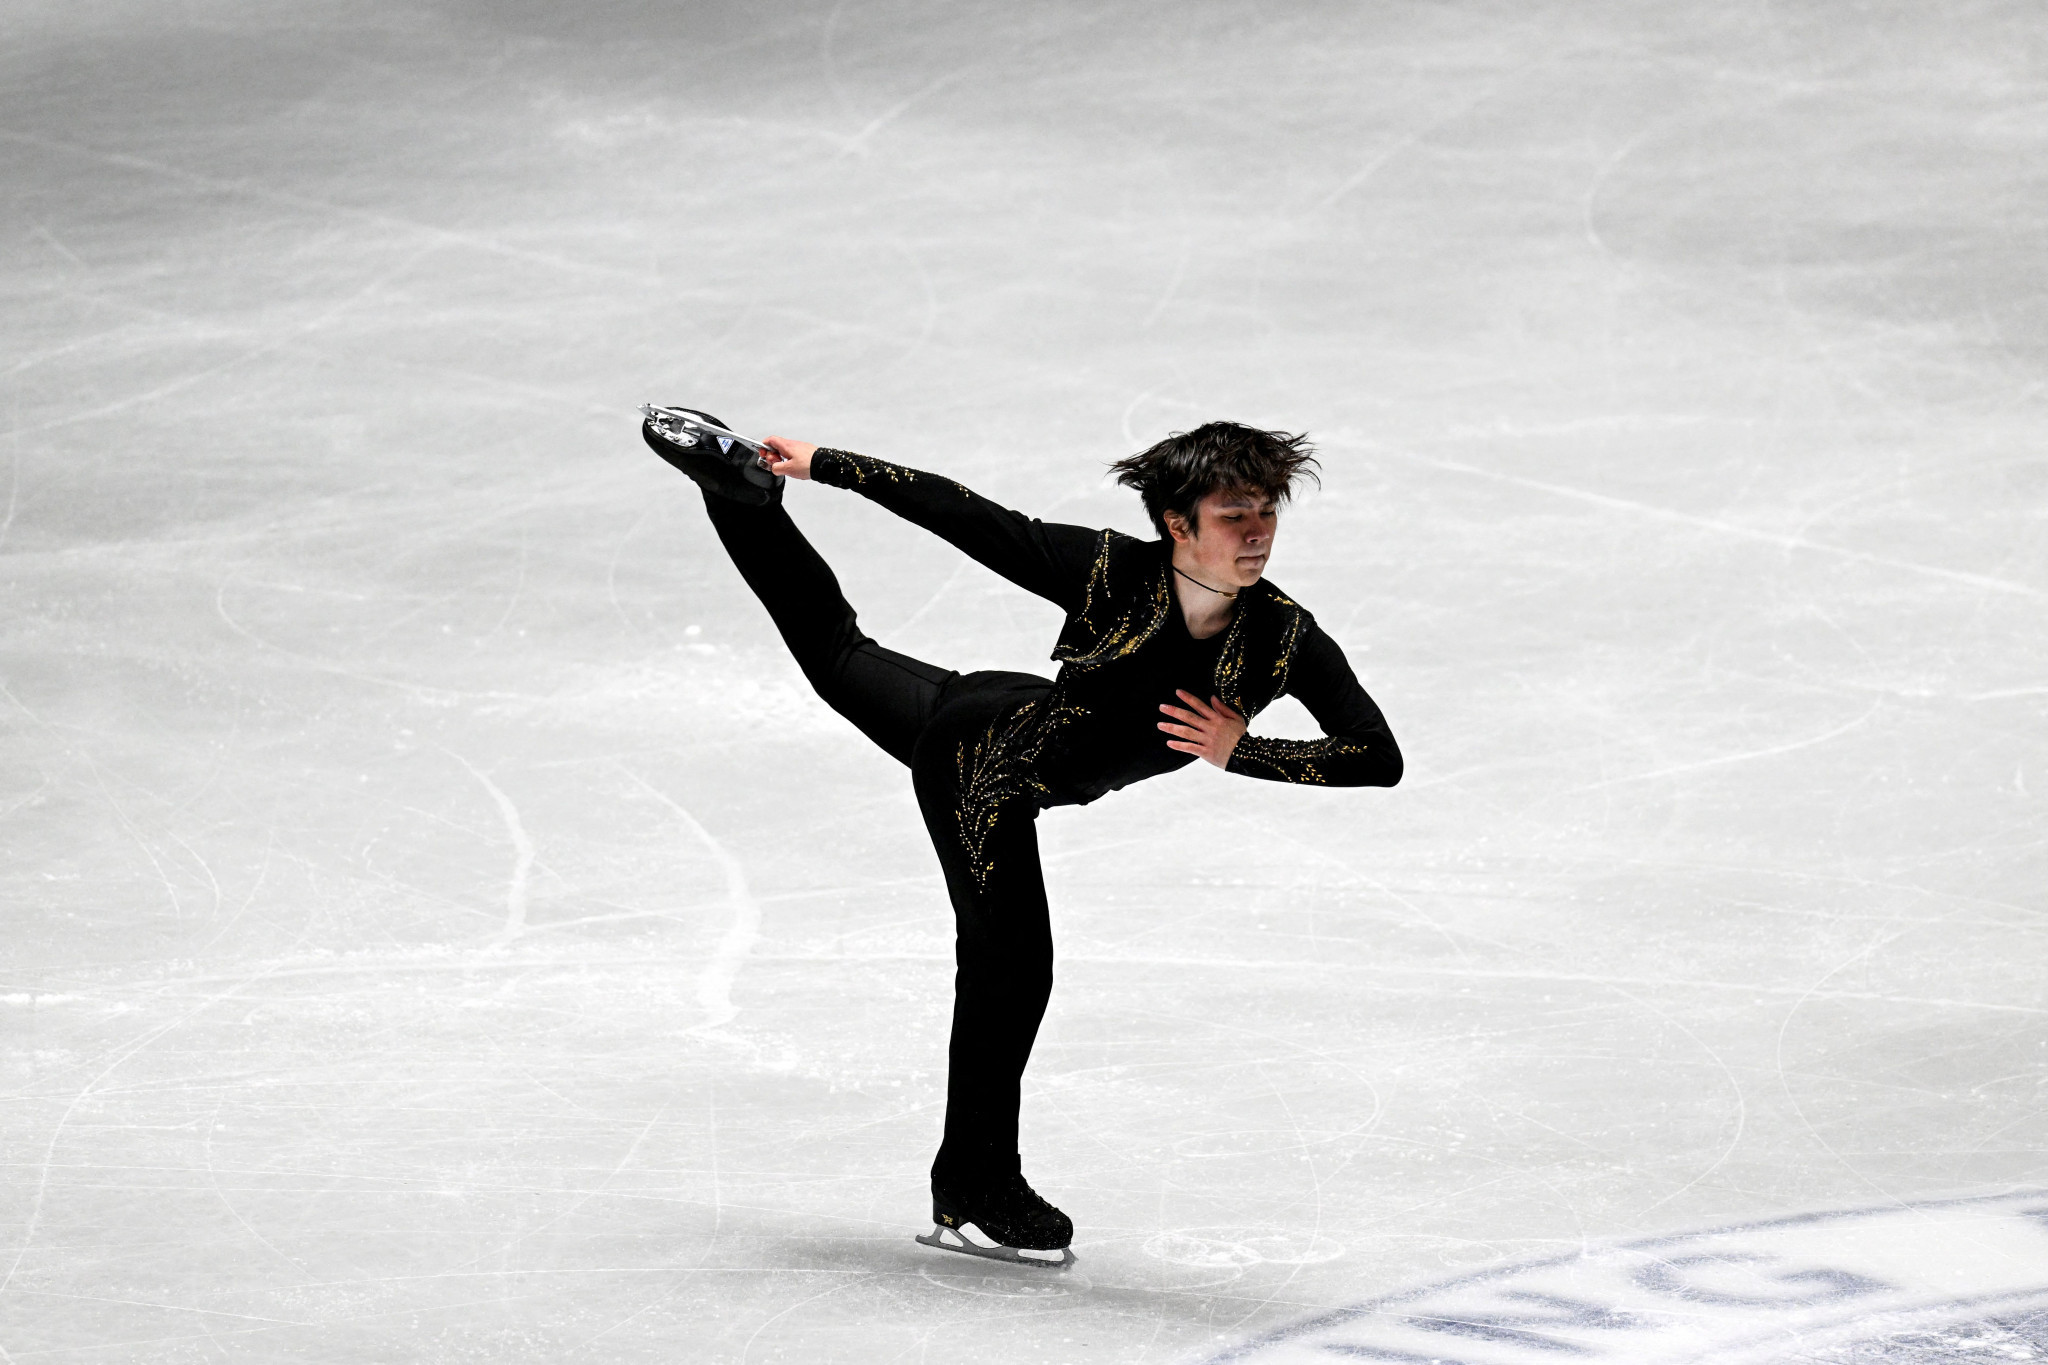 Shoma Uno earned a dominant victory in the men's event ©Getty Images